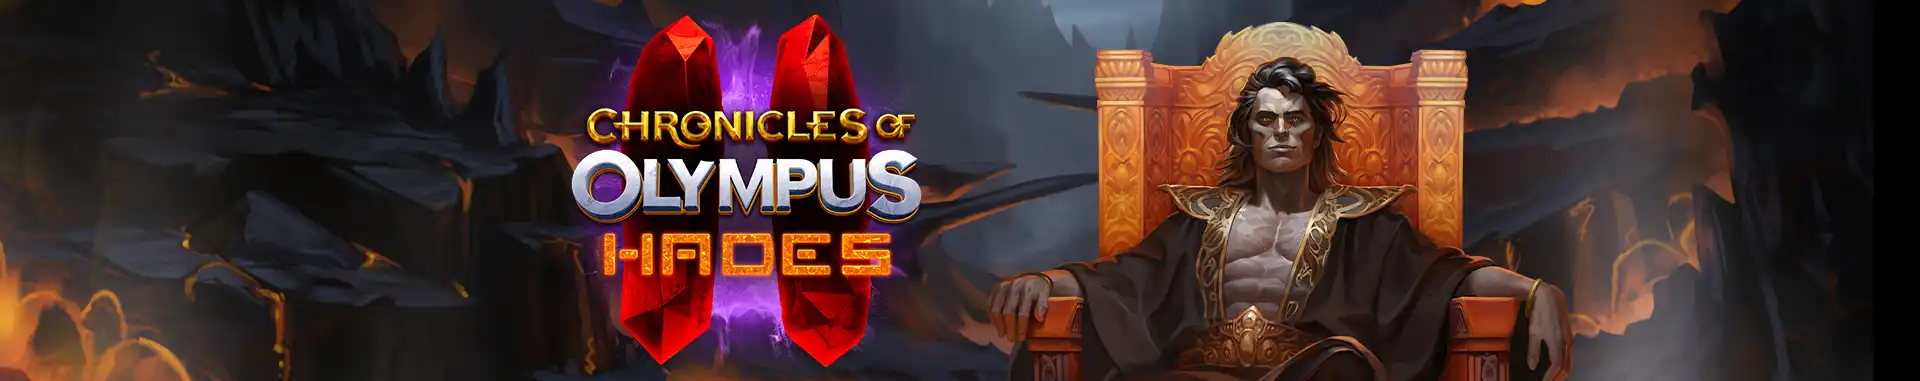 Tragaperras online Chronicles of Olympus 2 Hades